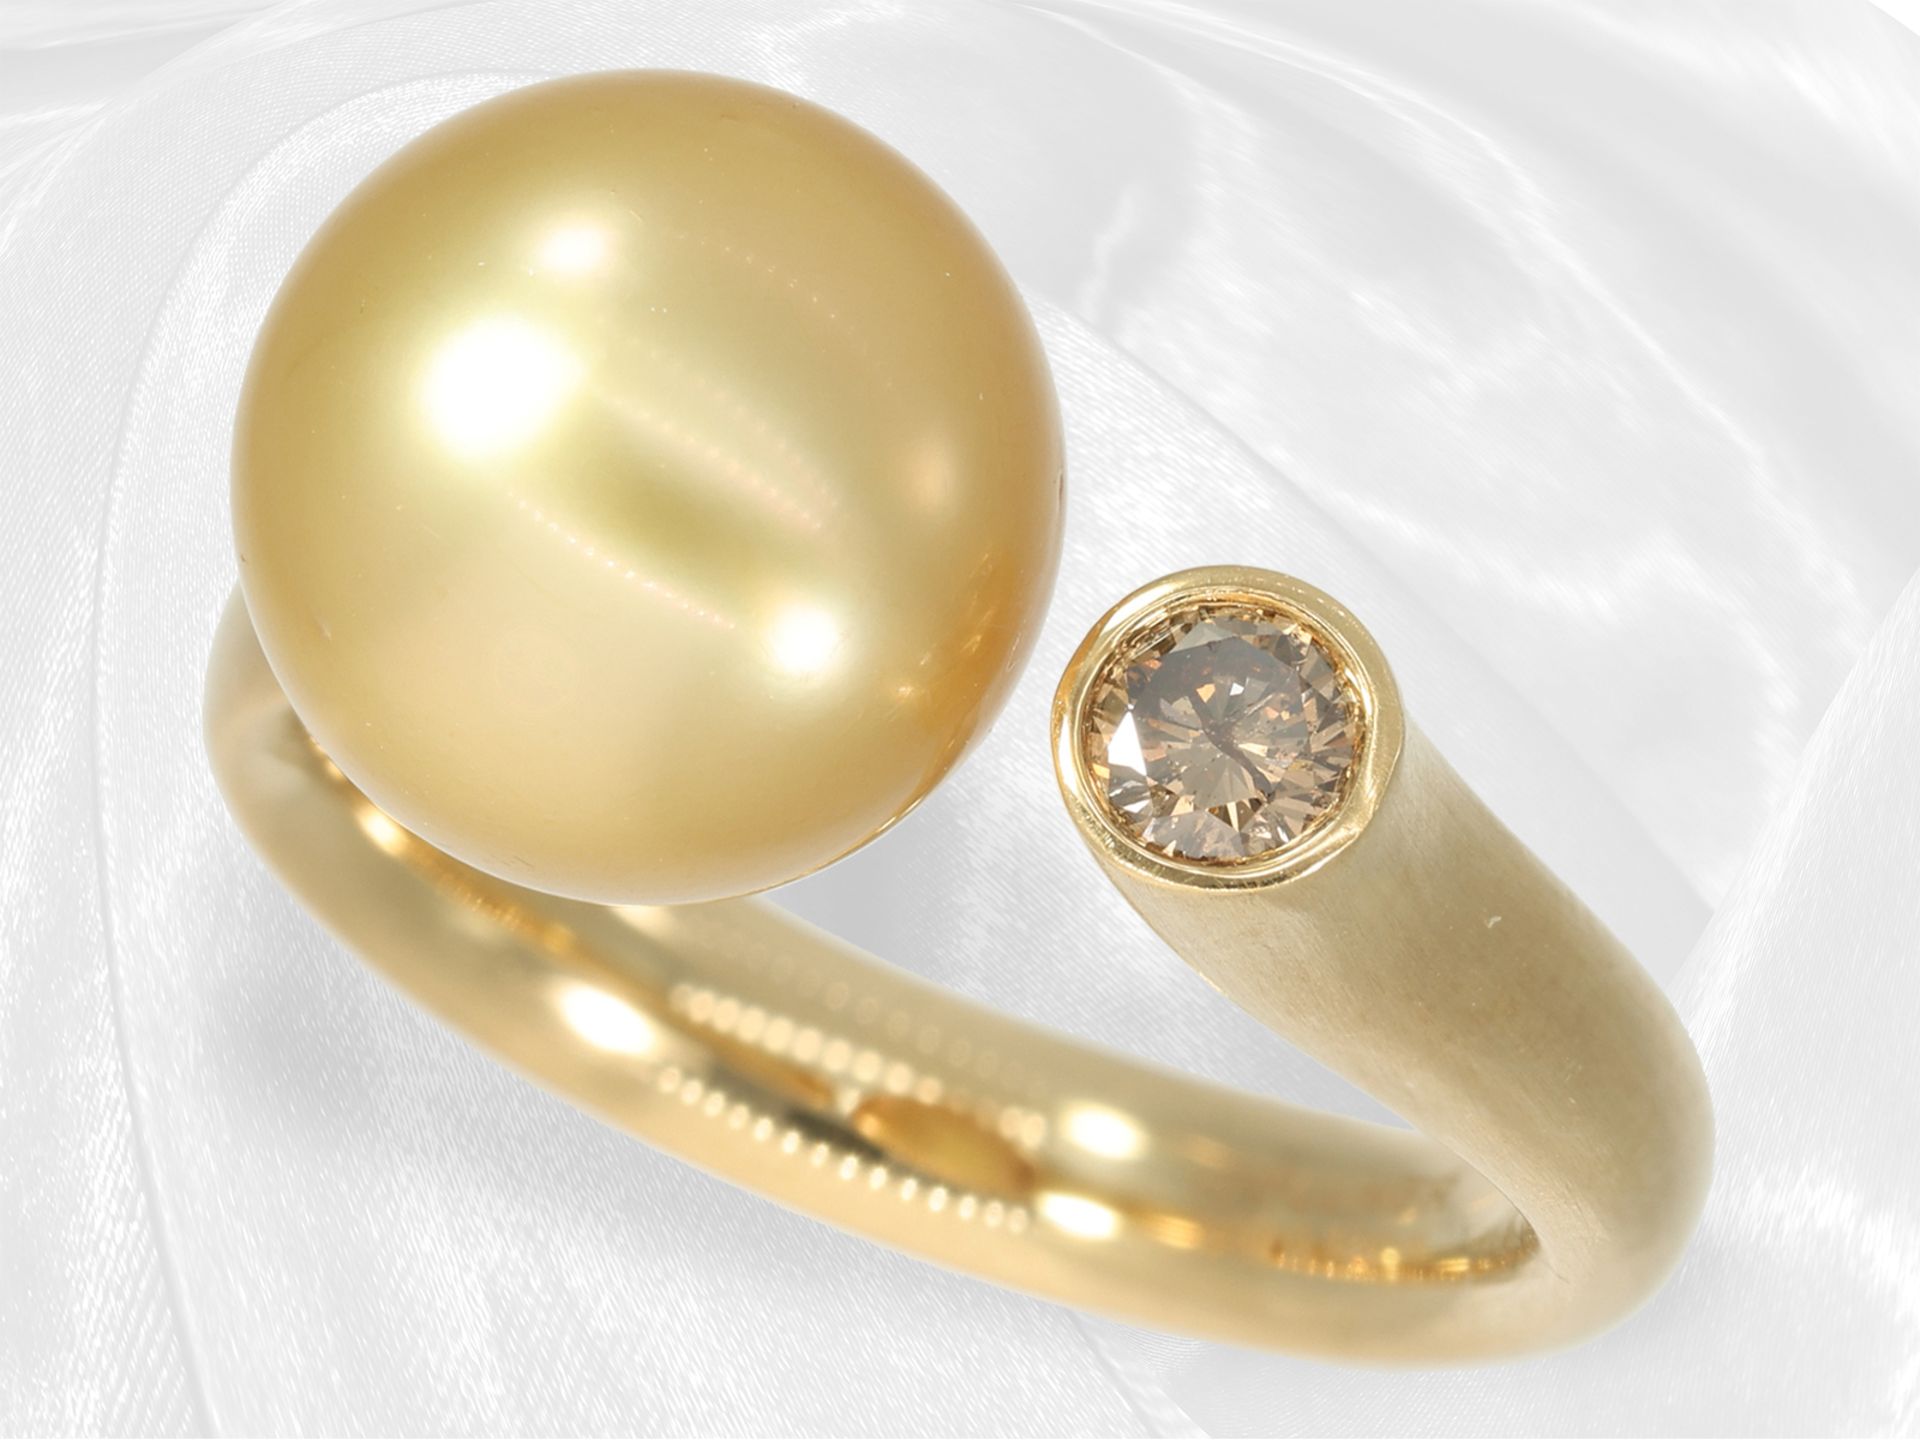 Elaborately crafted, high-quality designer ladies' ring with finest South Sea pearl and fancy diamon - Image 3 of 10